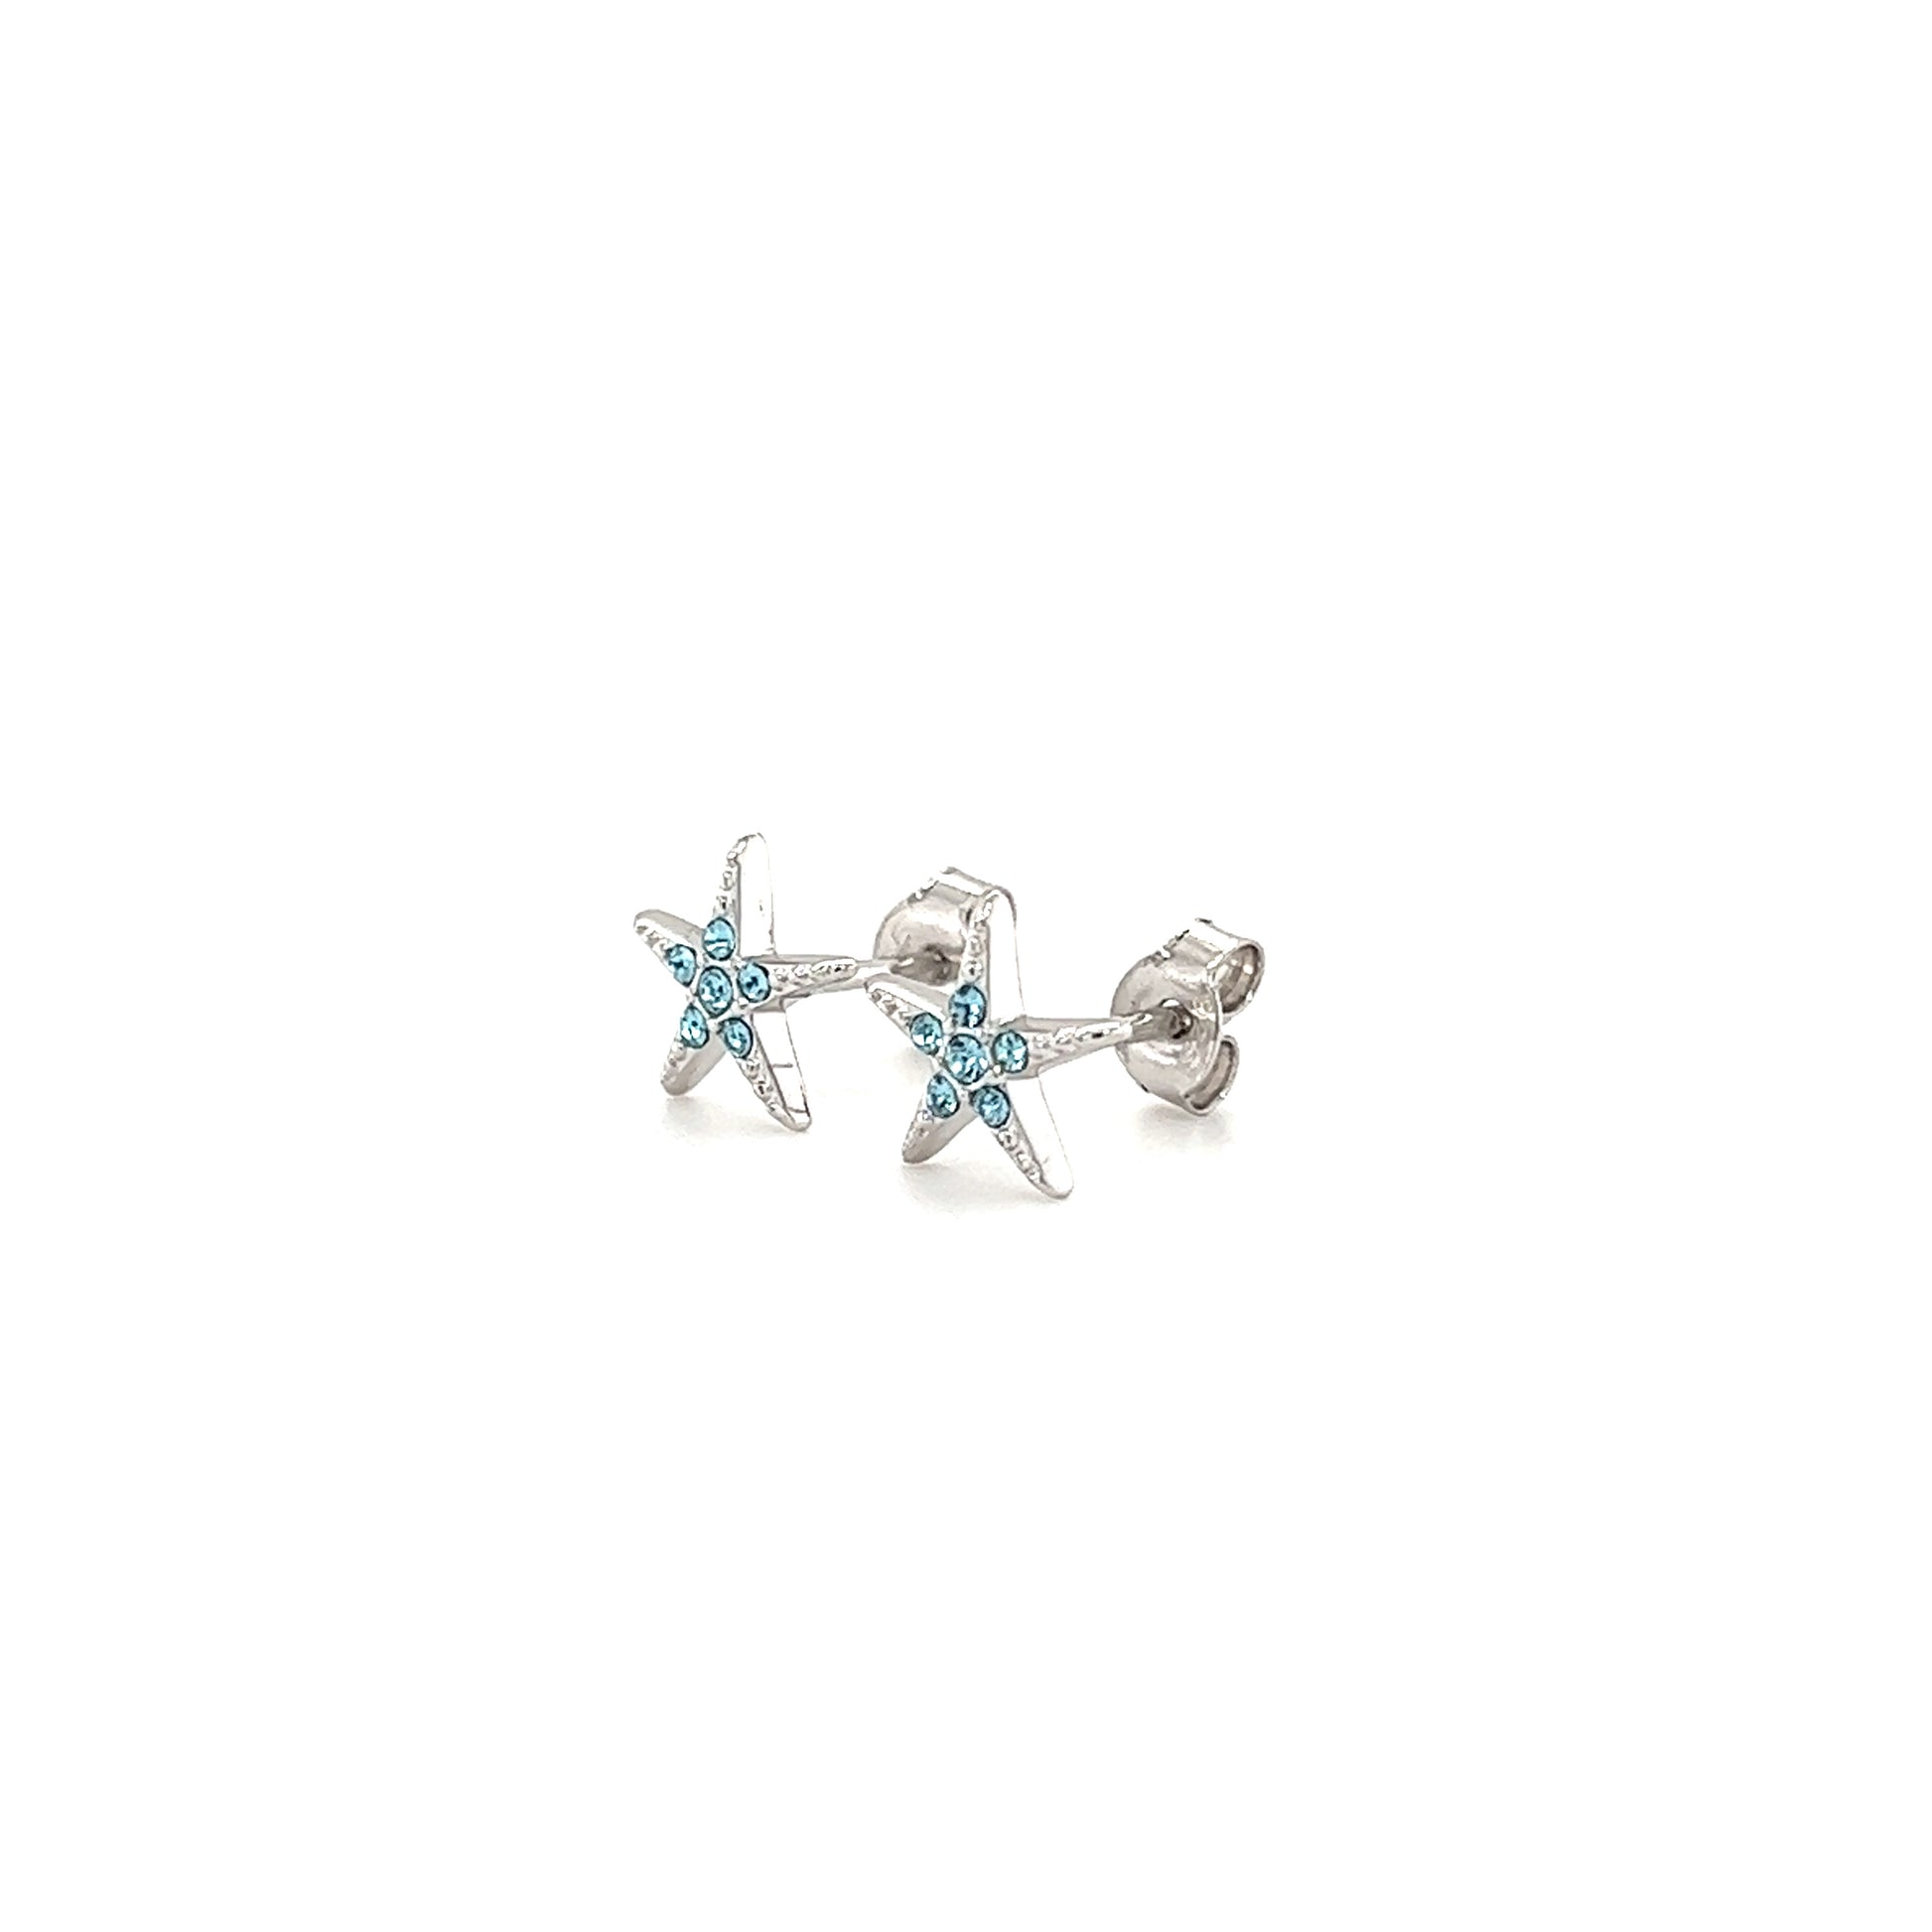 Starfish Stud Earrings with Aqua Crystals in Sterling Silver Right Side View